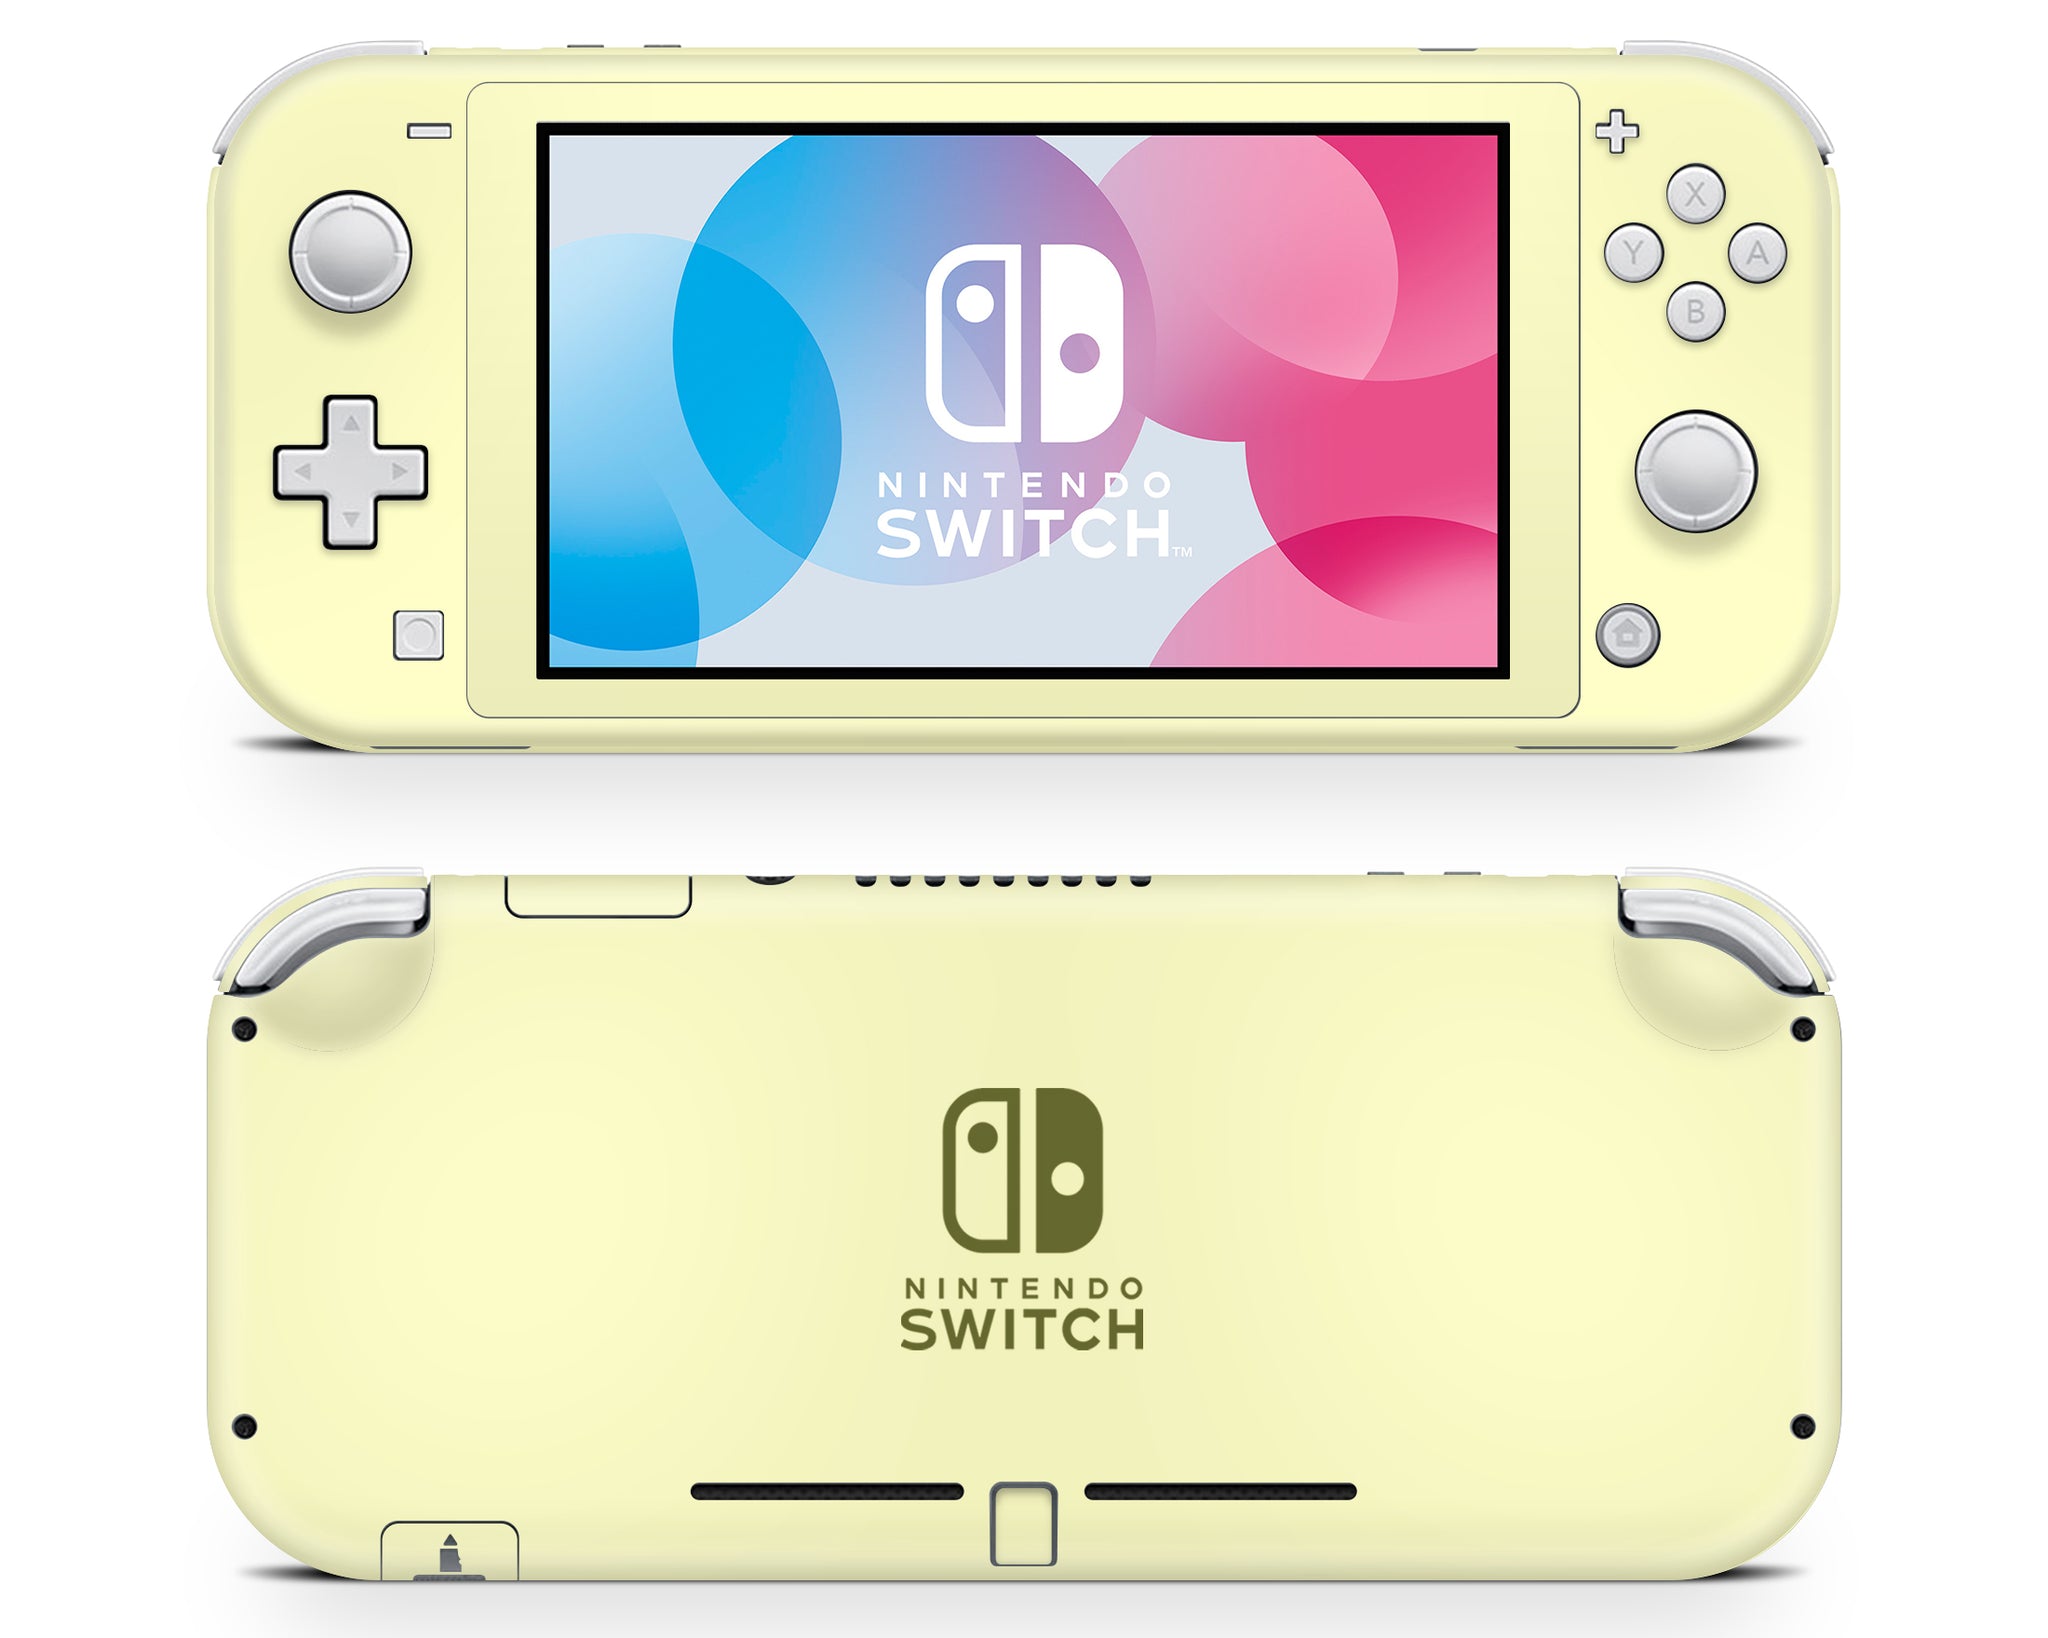 Accent Series Pastel Color Nintendo Switch Lite Skin